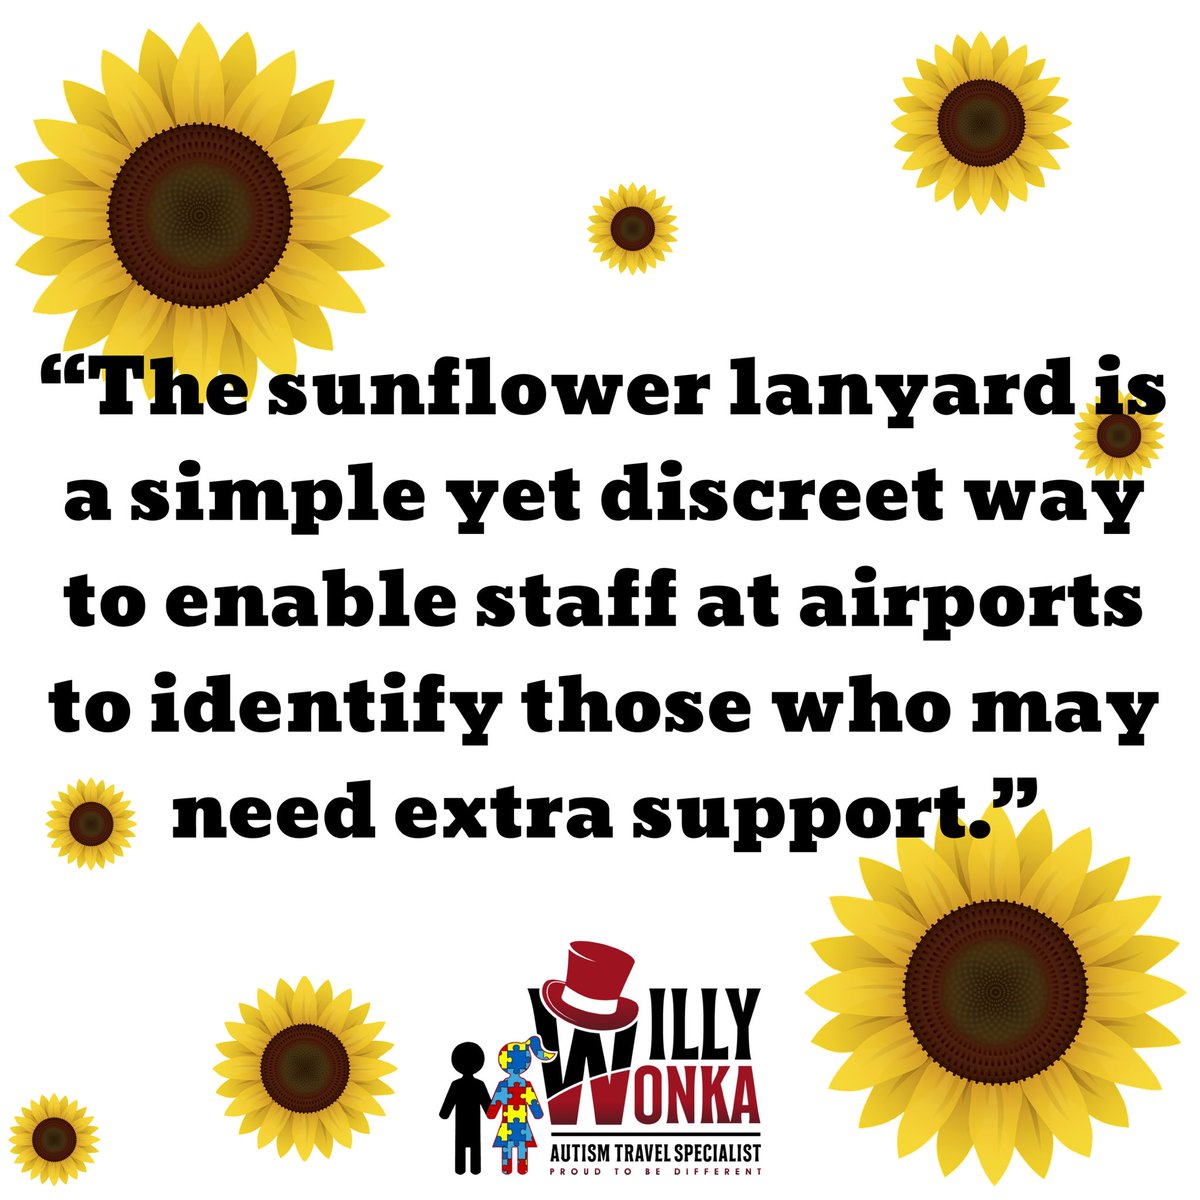 The #sunflowerlanyardscheme is currently being rolled out across UK airports and is designed to help people with #hiddendisabilities. The lanyard acts as a signal to staff that the wearer requires additional assistance. #travellingwithautism #autismtravel #autismacceptance